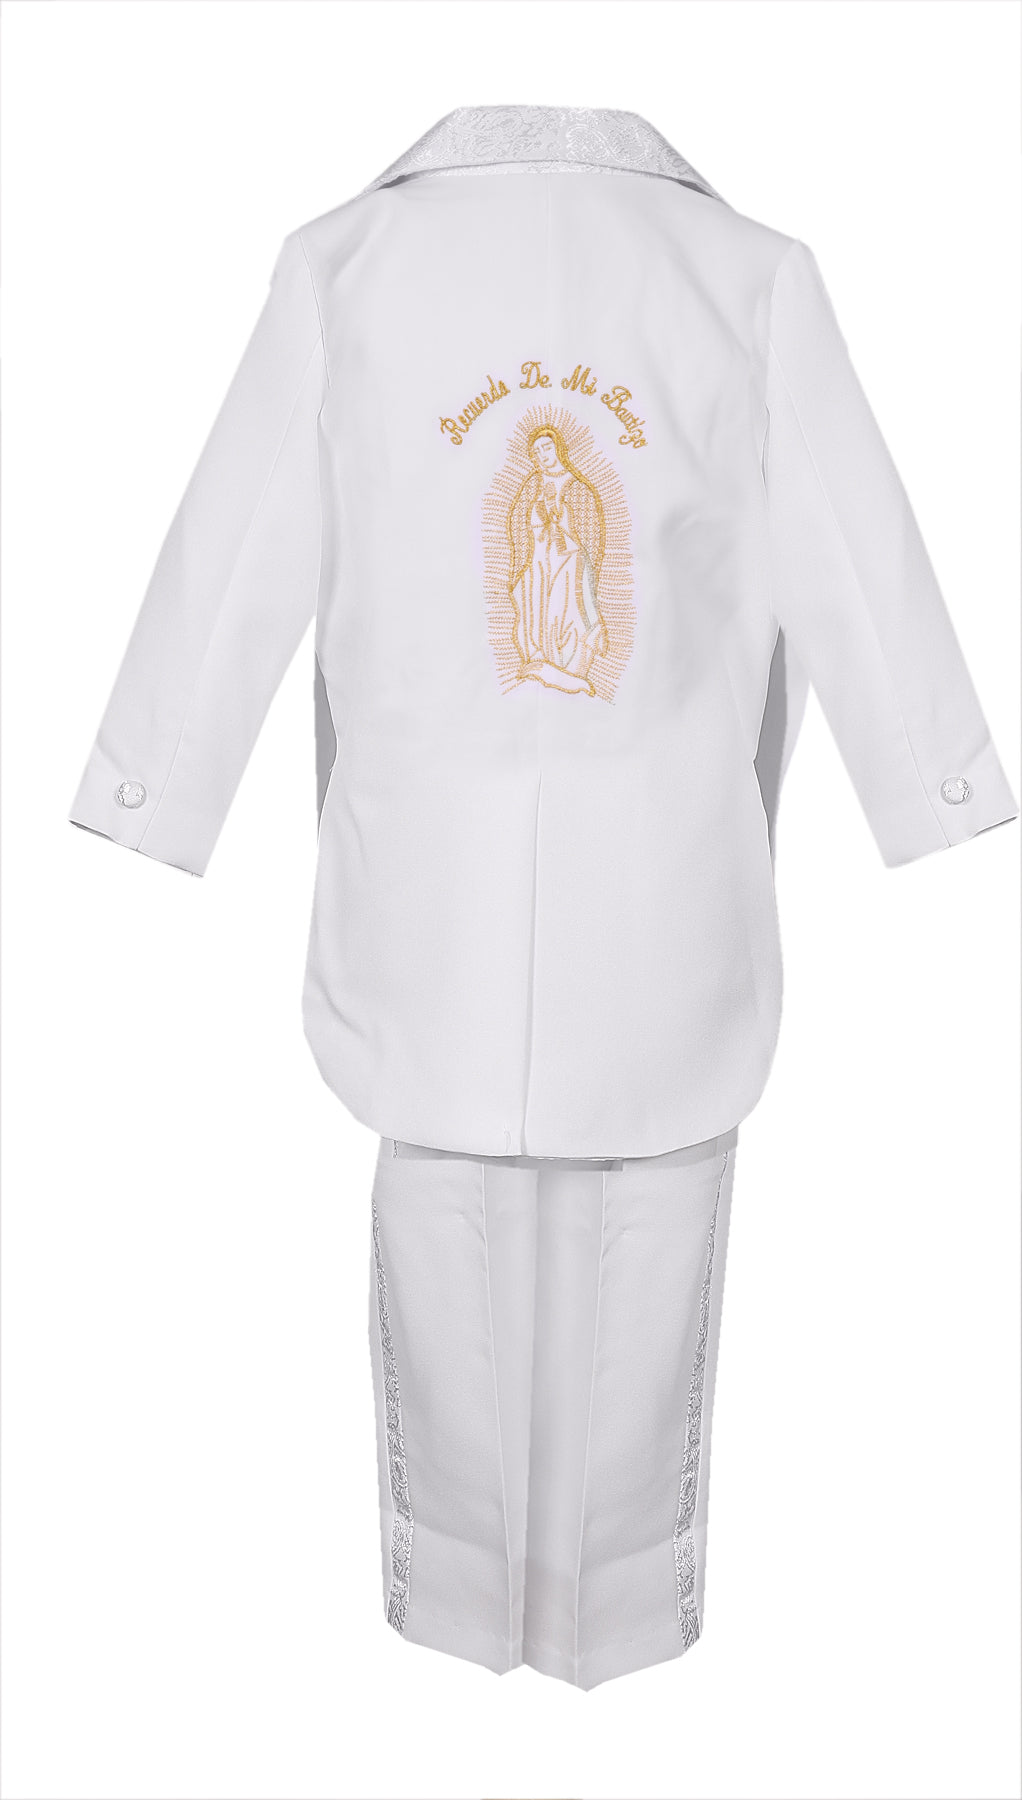 Boys Baptism Tuxedo Suit with Estola Silver Embroidery   RFL-011M